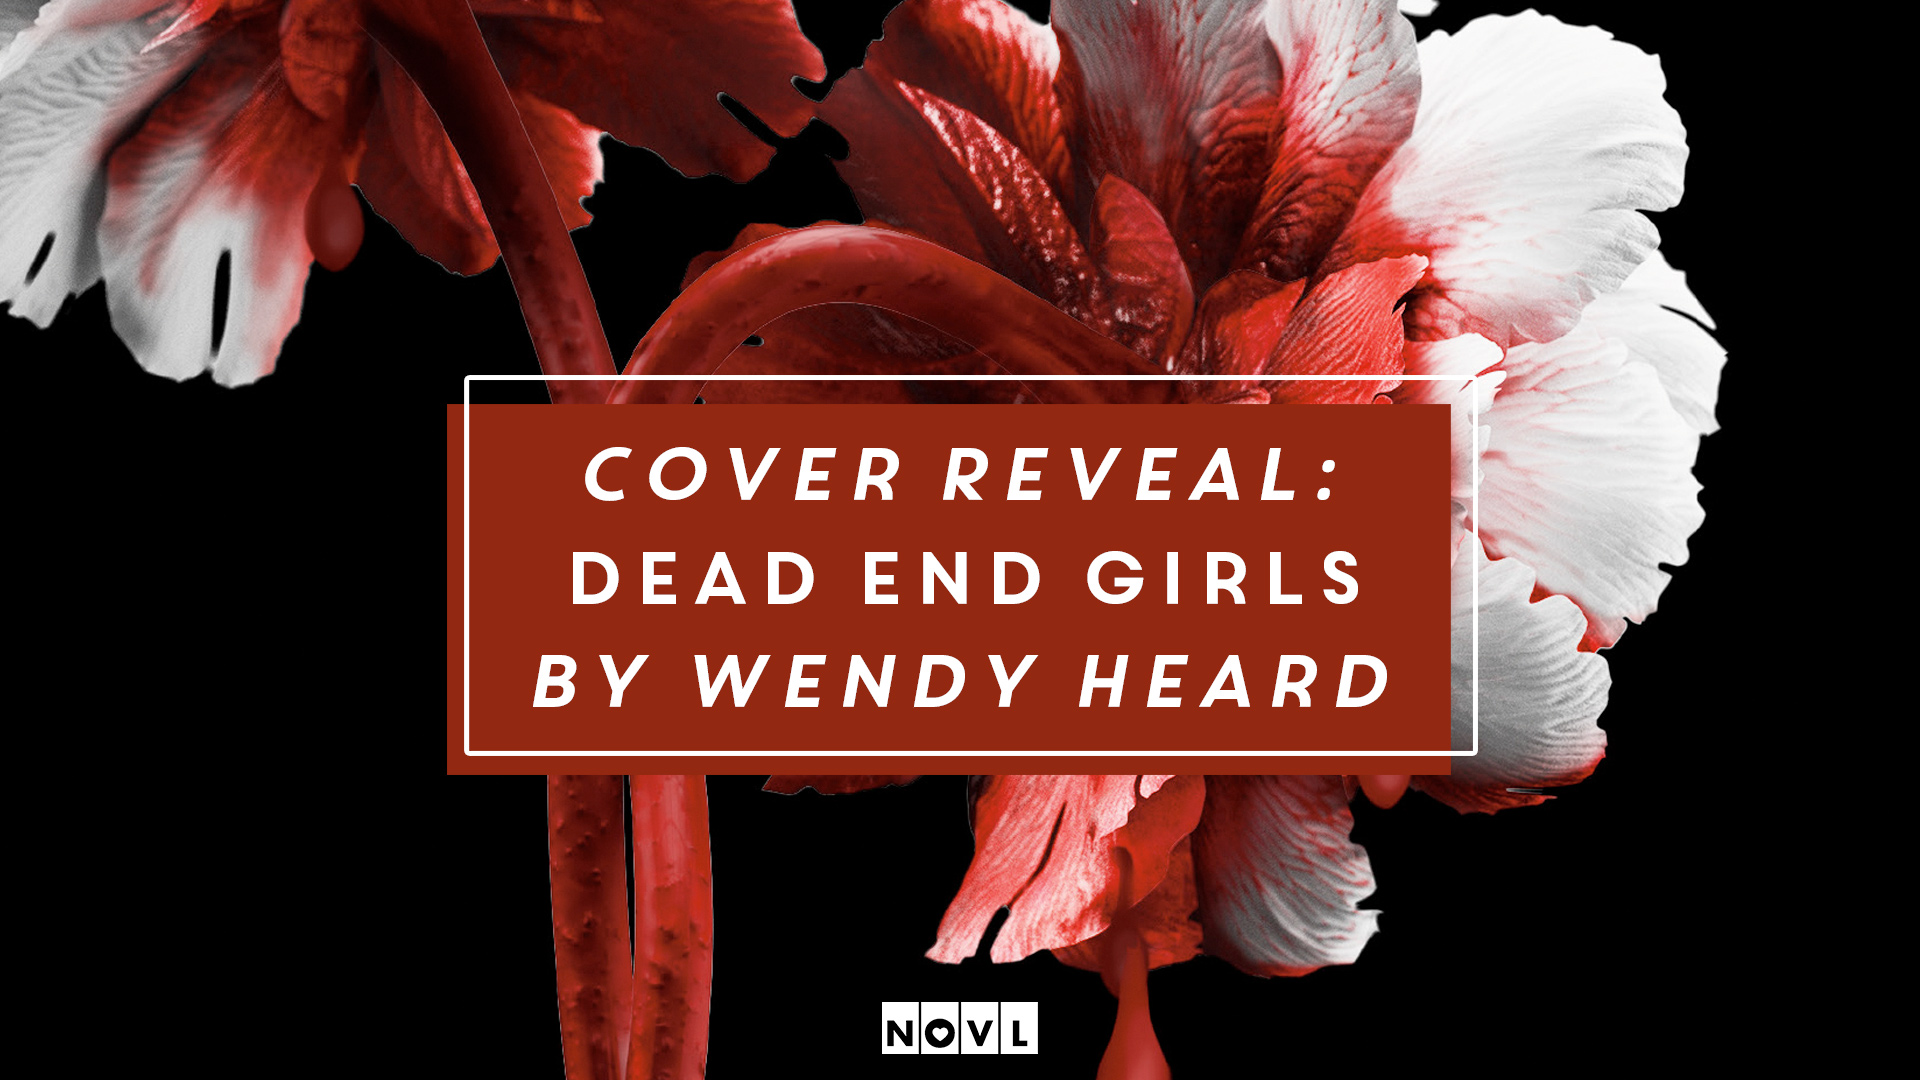 The NOVL Blog, Featured Image for Article: Cover Reveal: Dead End Girls by Wendy Heard